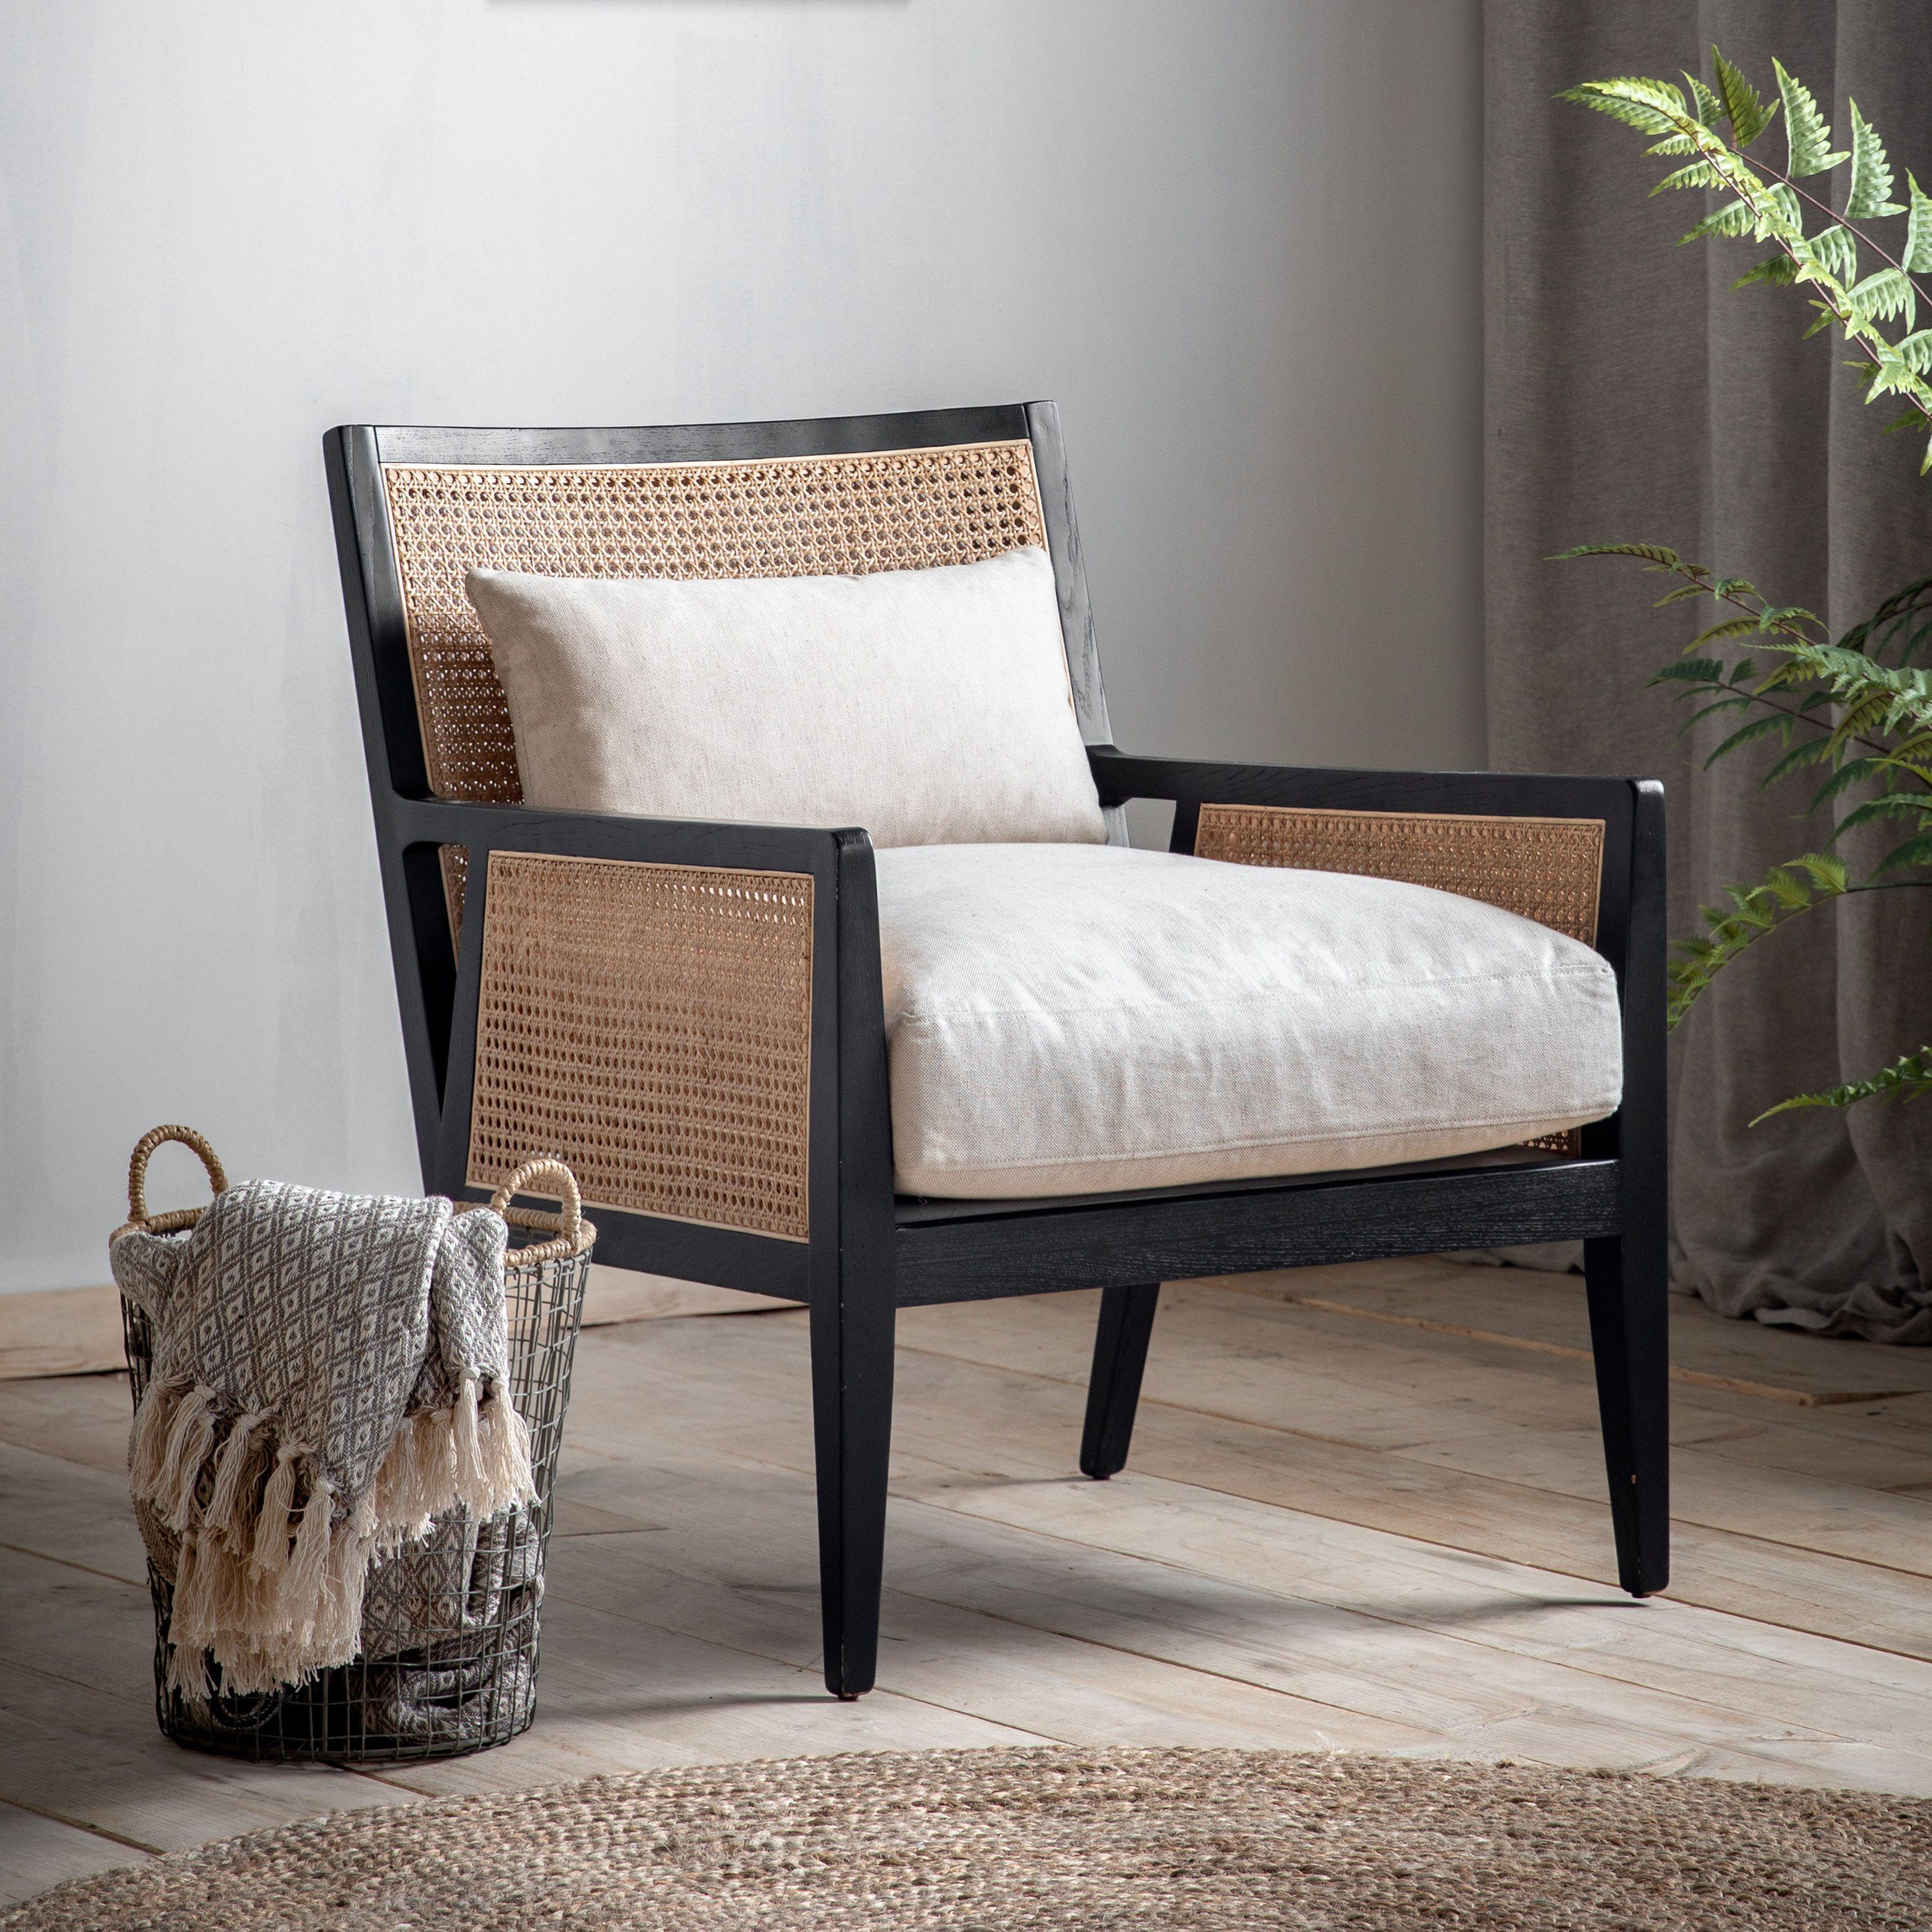 Opus Rattan Weave Armchair with Black Timber Frame - Maison Rêves UK